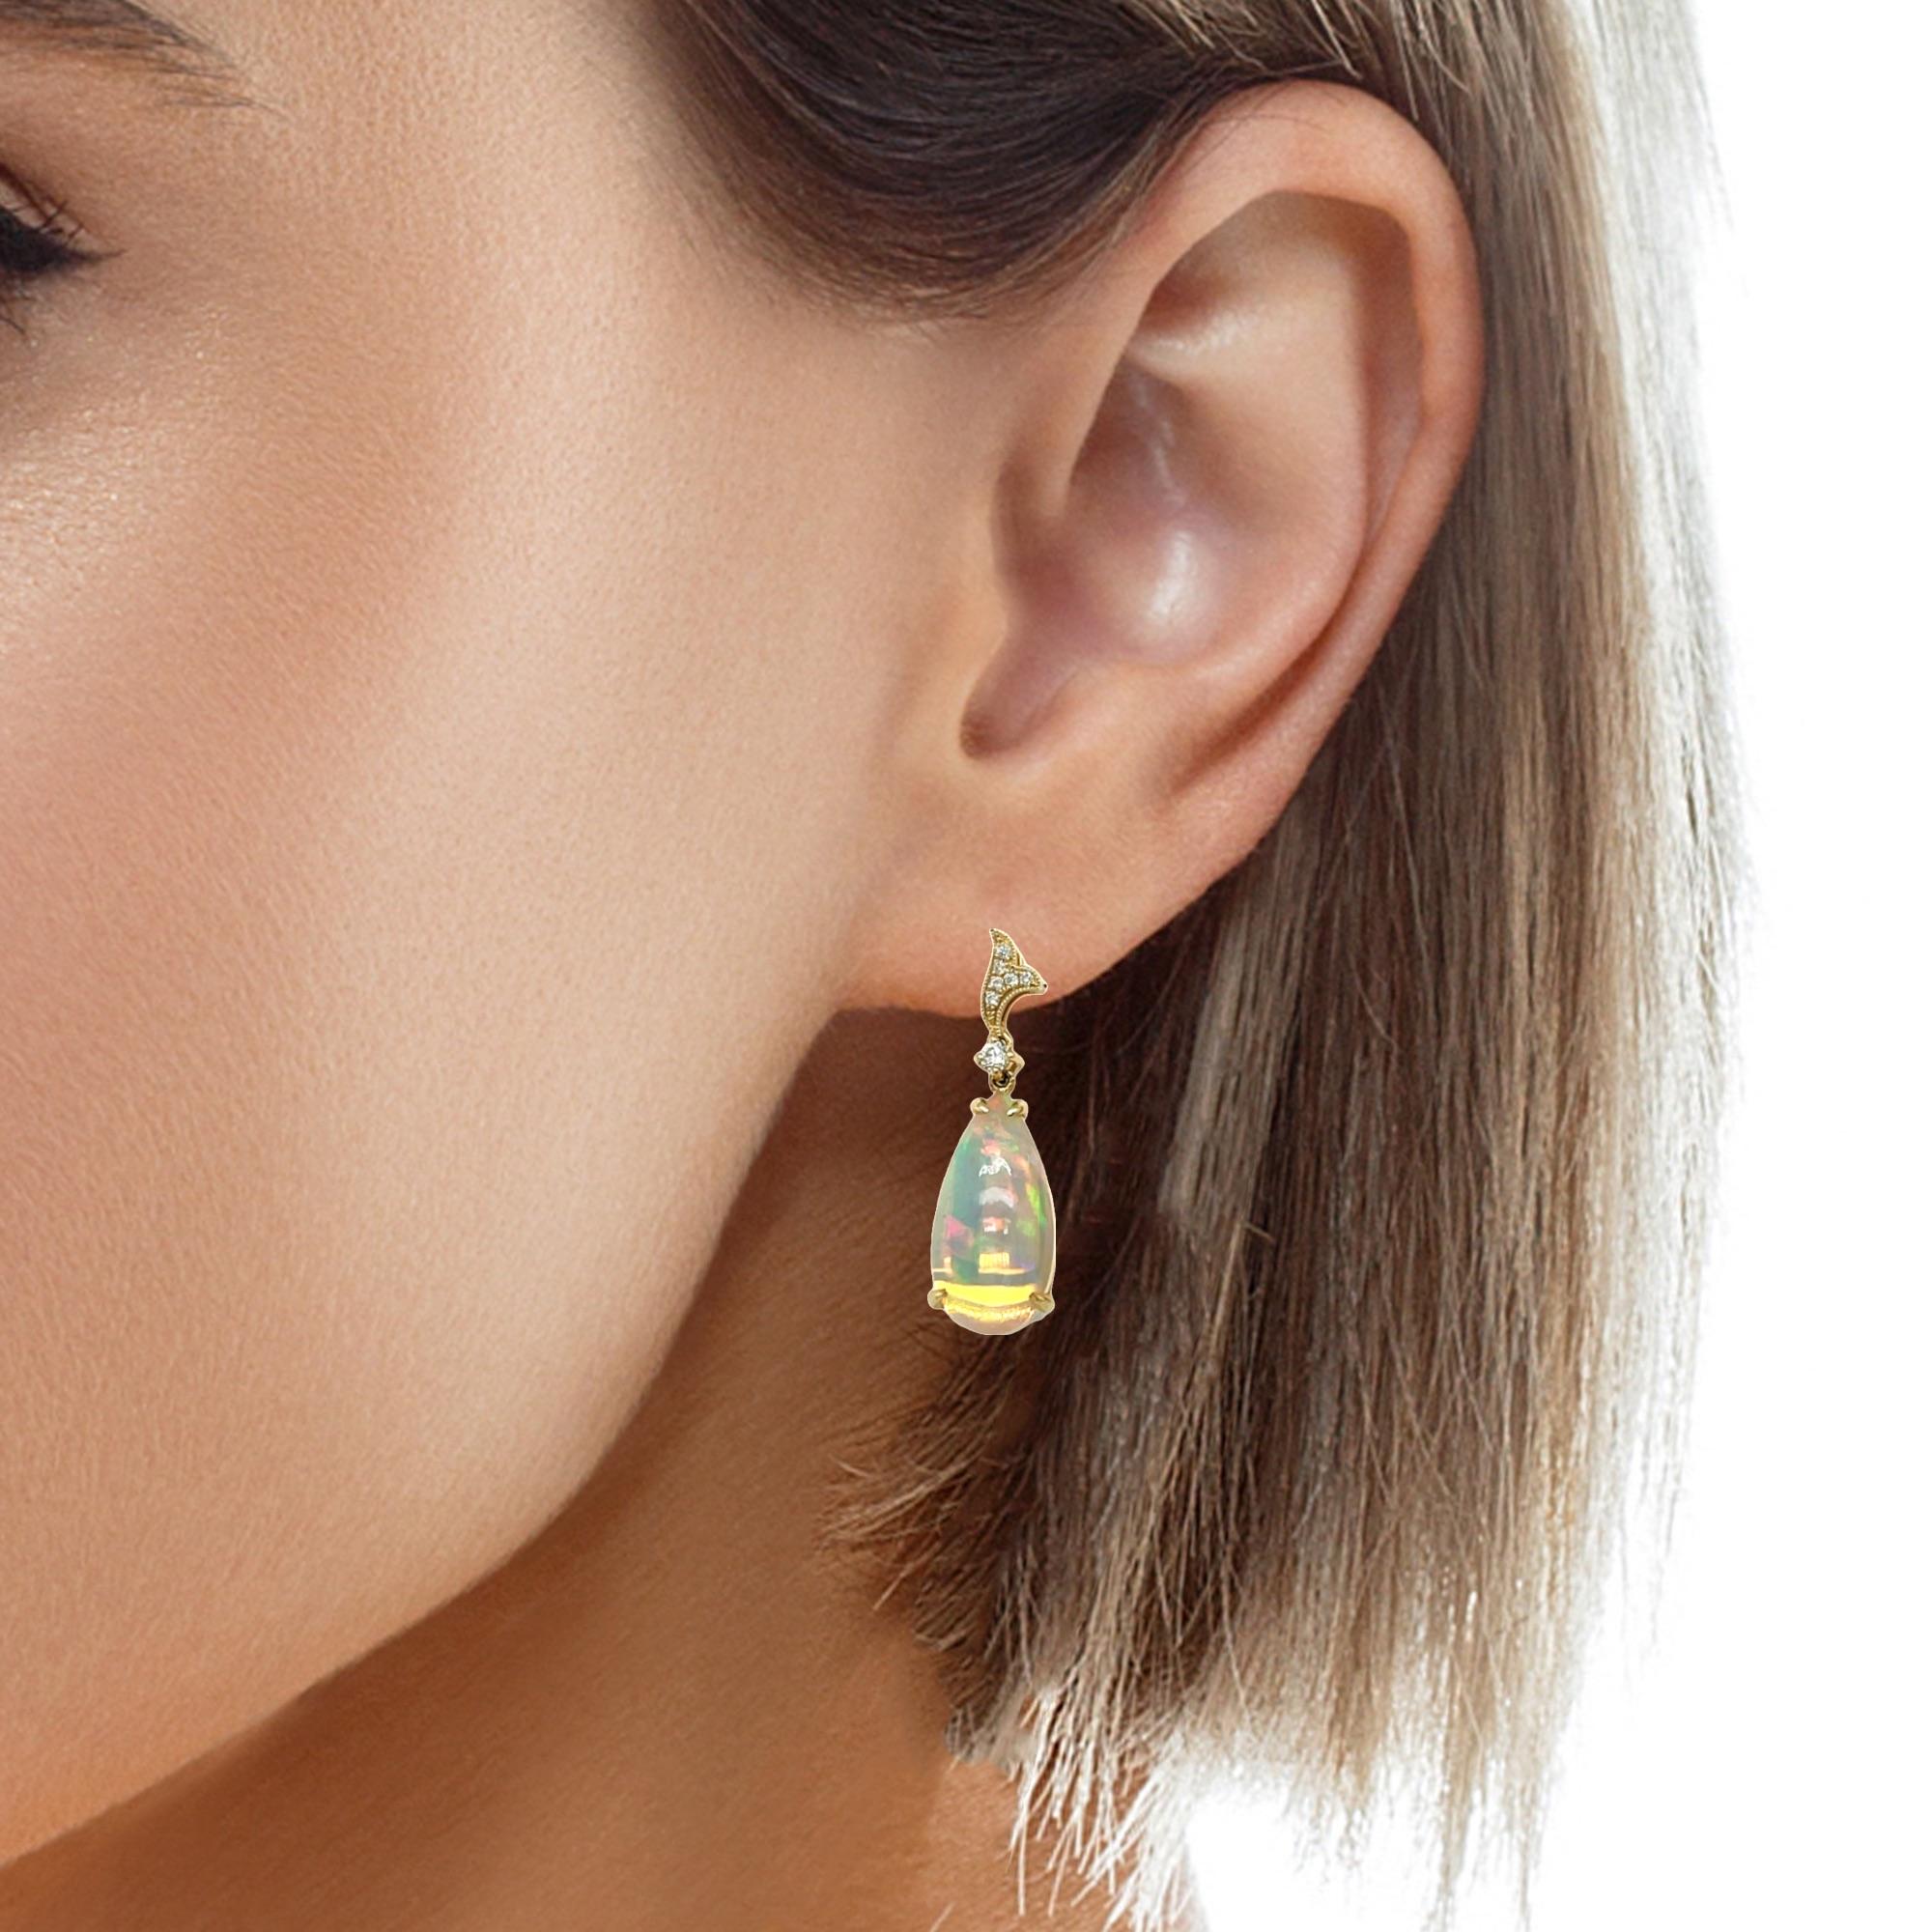 These stunning genuine Teardrop Ethiopian Opal and diamond dangling earrings are a beautiful accessory for your special event. These earrings have a 18x9 pear shaped opal which has a 4 prong setting in 14 karat yellow gold. There are sparkling